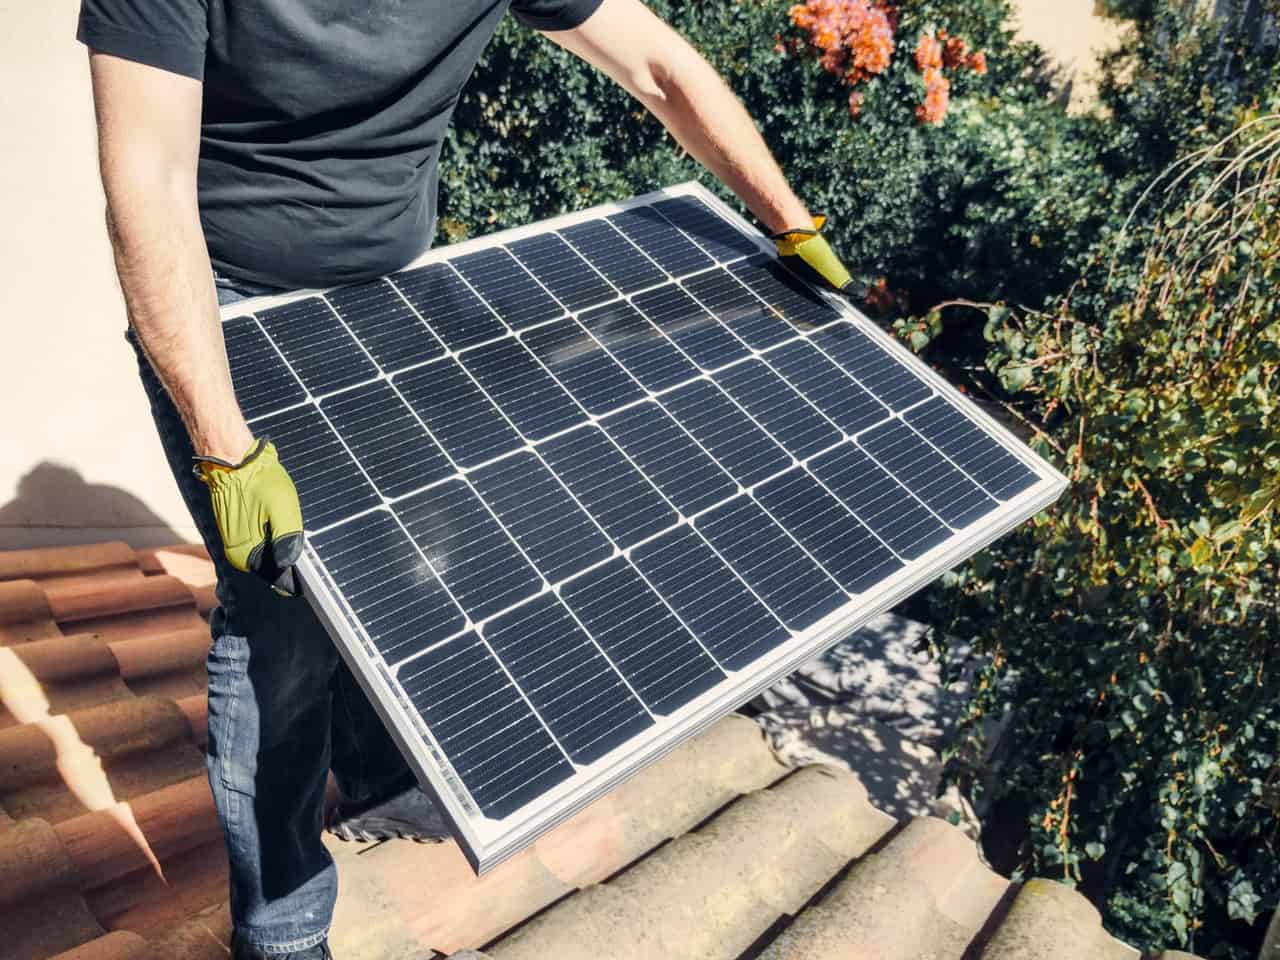 Can Installing Solar Panels Really Save You Money?